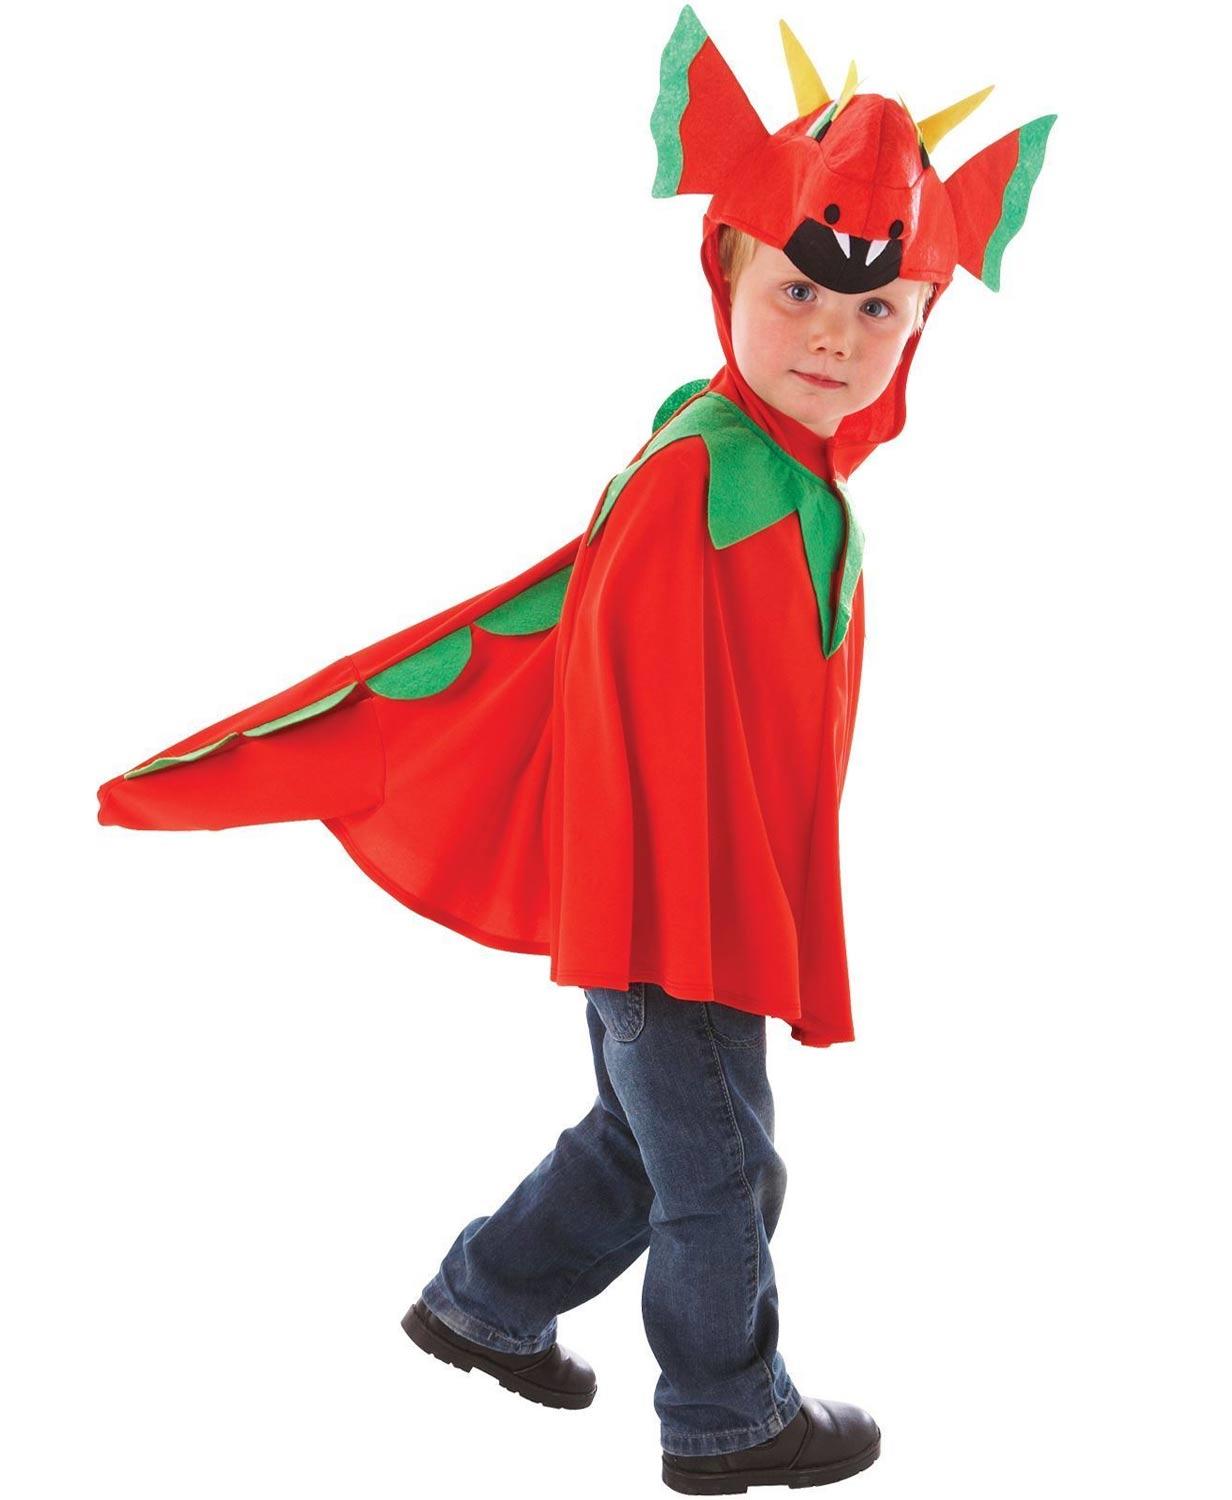 Deluxe friendly looking red dragon fancy dress cape ideally for ages 3-8yrs by Travis Designs 994994 available here at Karnival Costumes online party shop